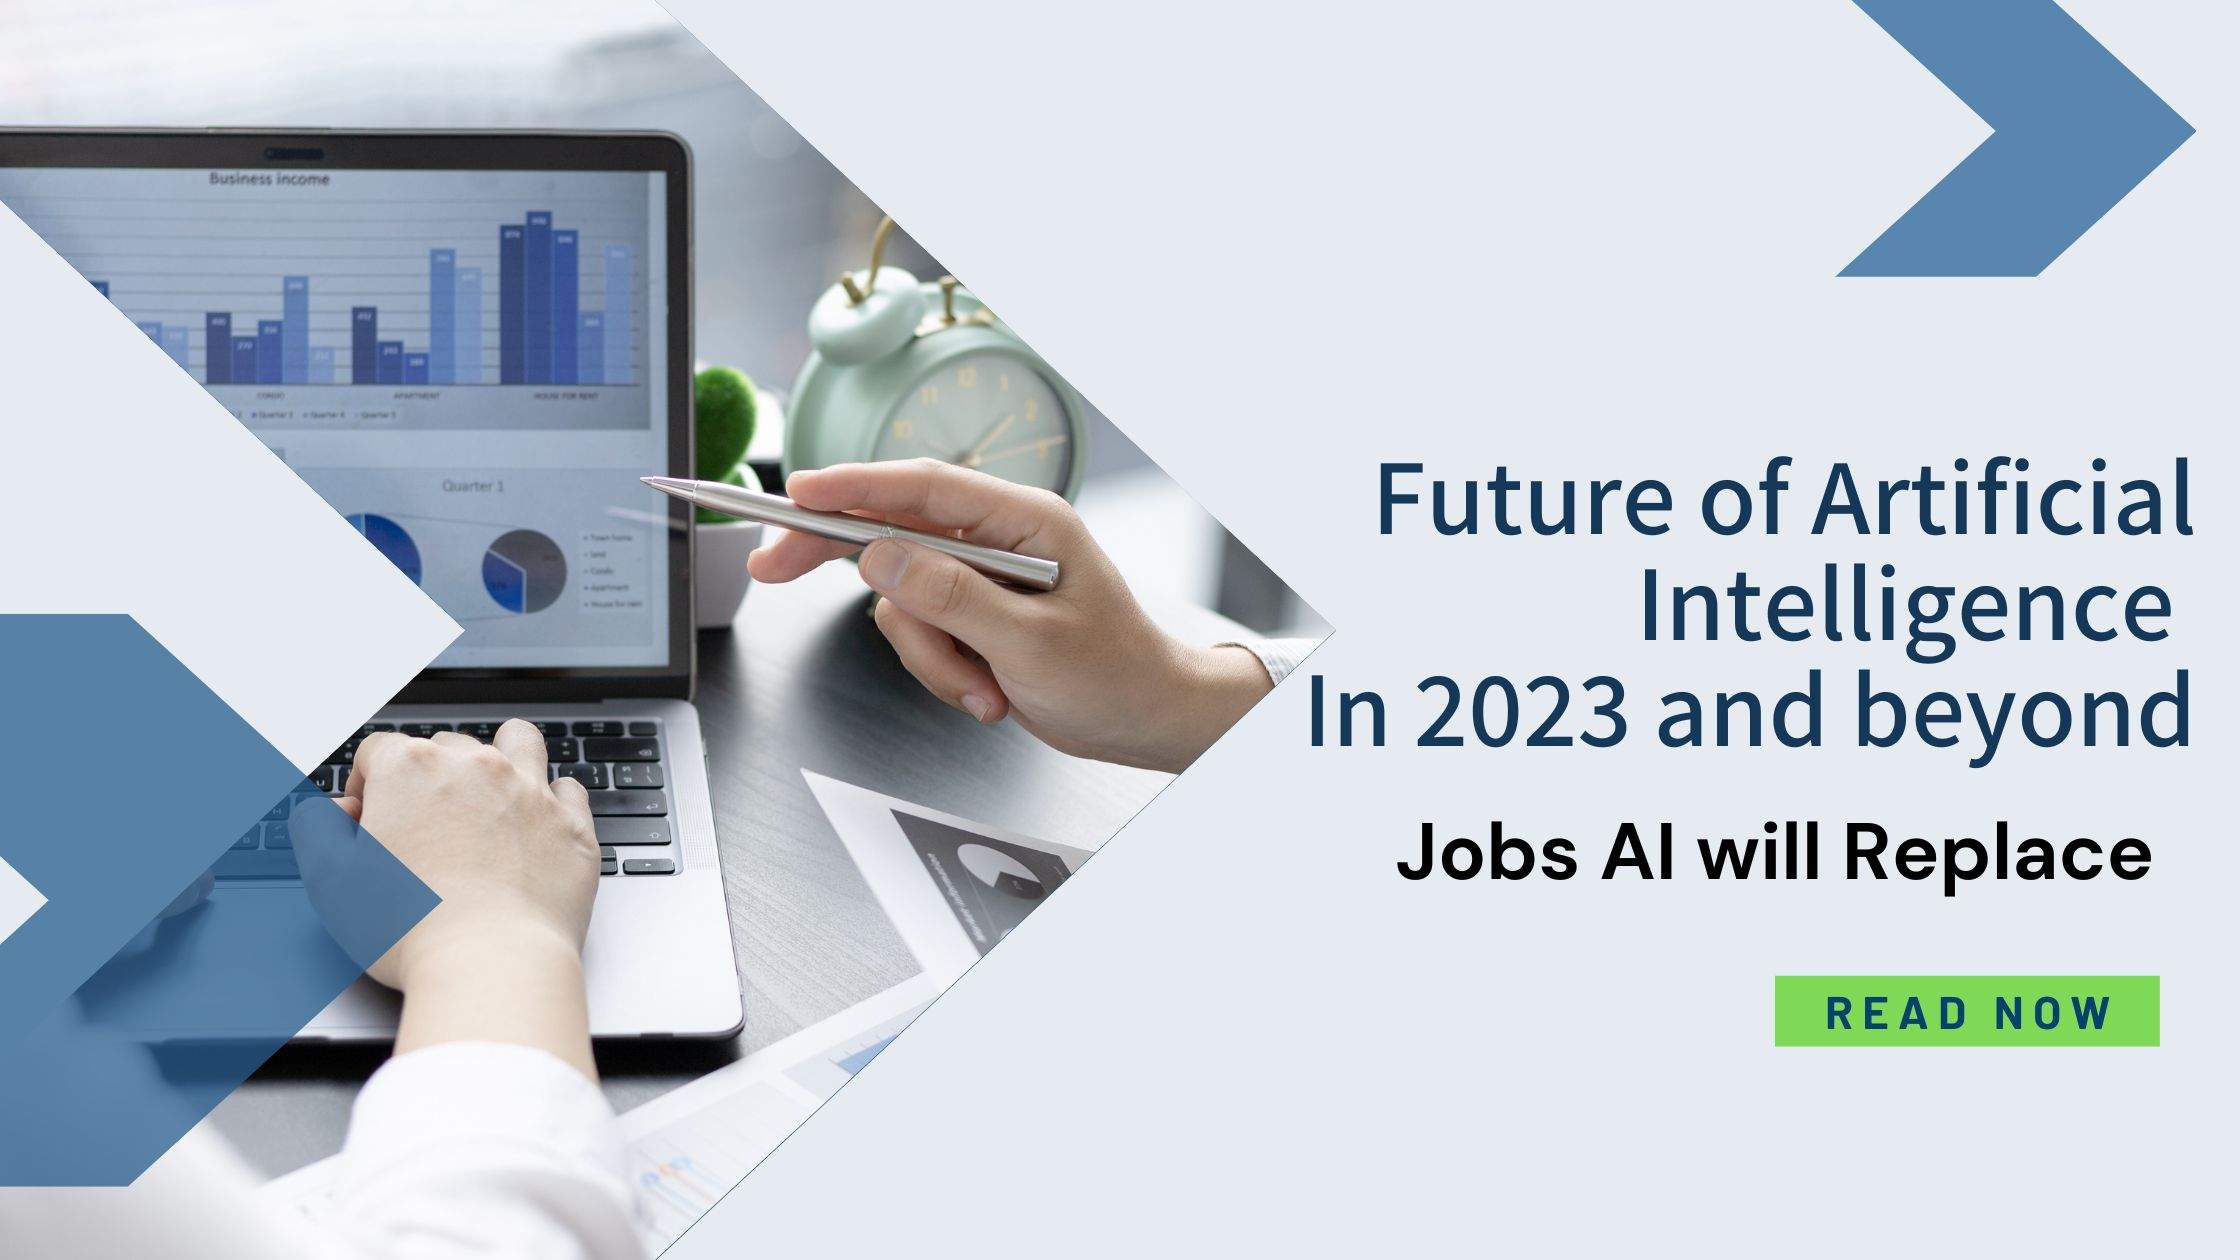 Which jobs will AI replace